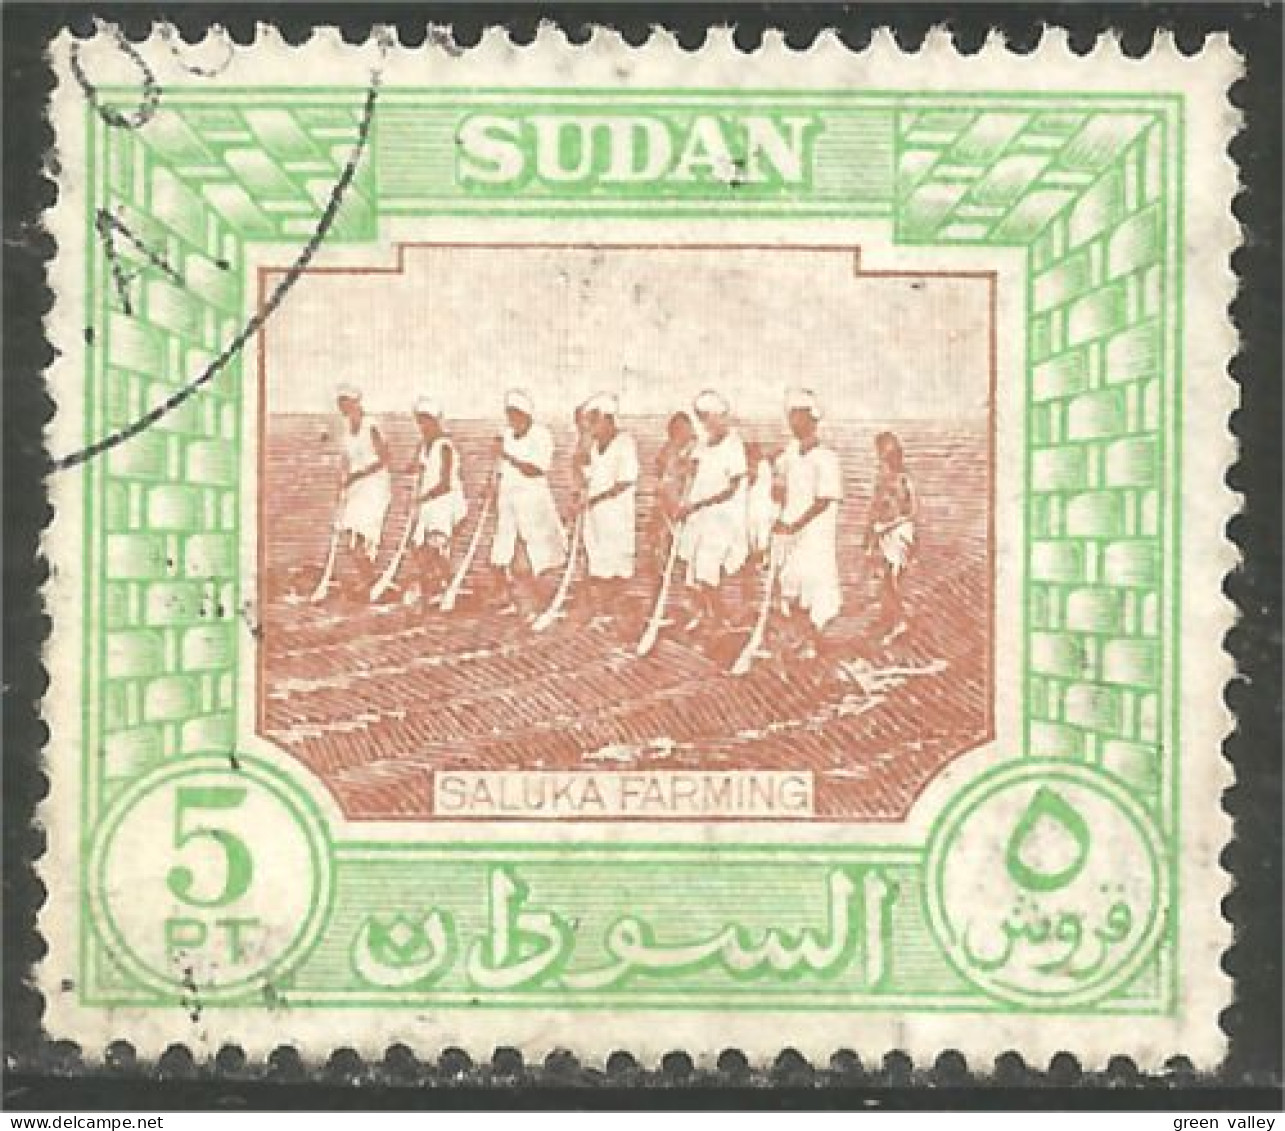 AL-64 Sudan Agriculture Labourage Ploughing  - Food